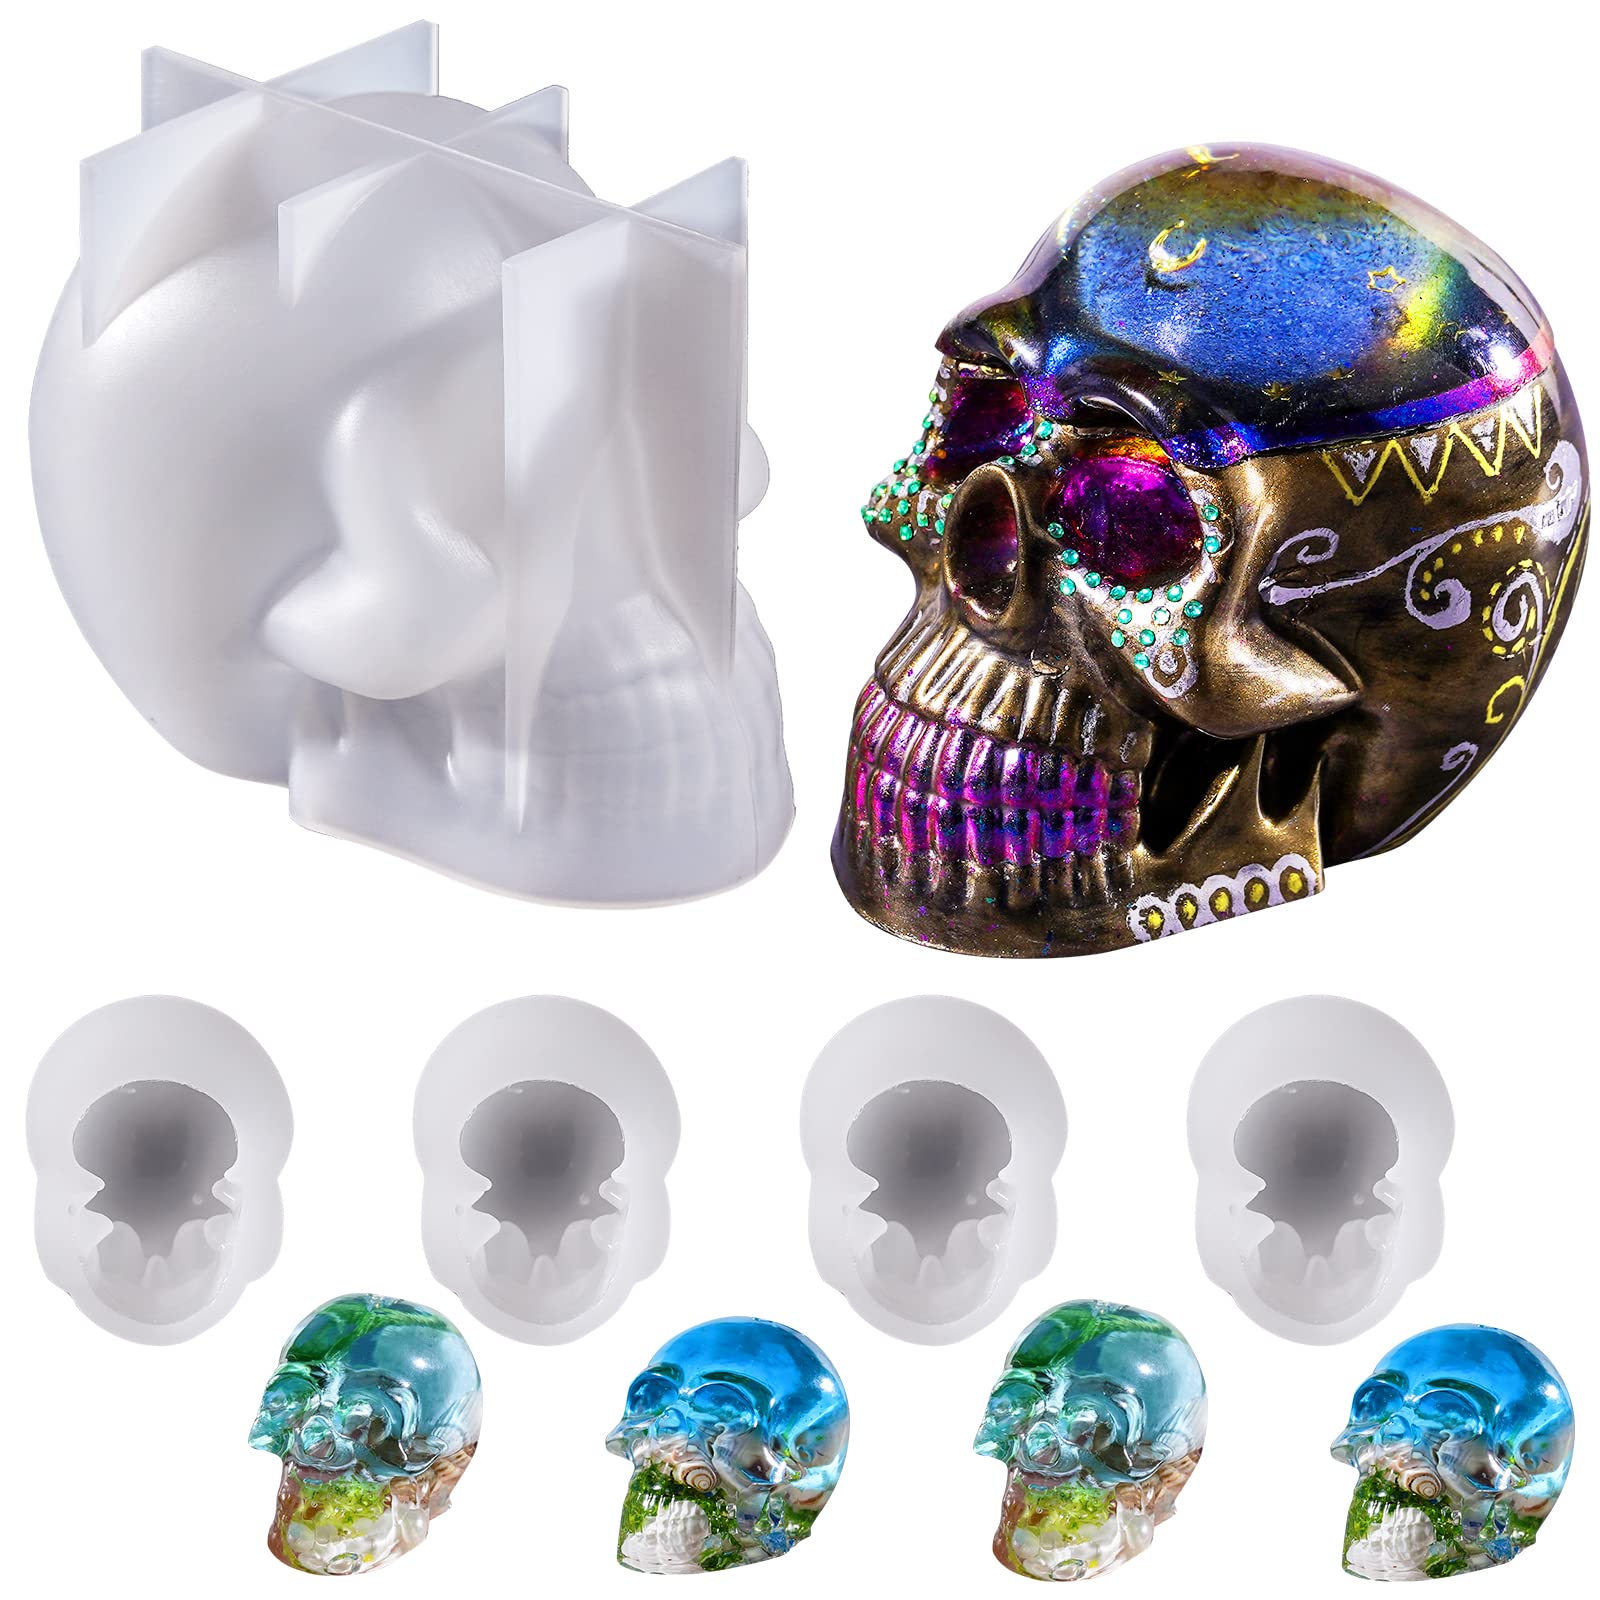 LET'S RESIN Resin Molds Silicone, 1 Pc Large Silicone Skull Epoxy Molds  with 4 Pcs Small Skeleton Epoxy Resin Molds for Resin Casting Art Crafts,  Candle Making, Home Decor, Pendants, Keychains